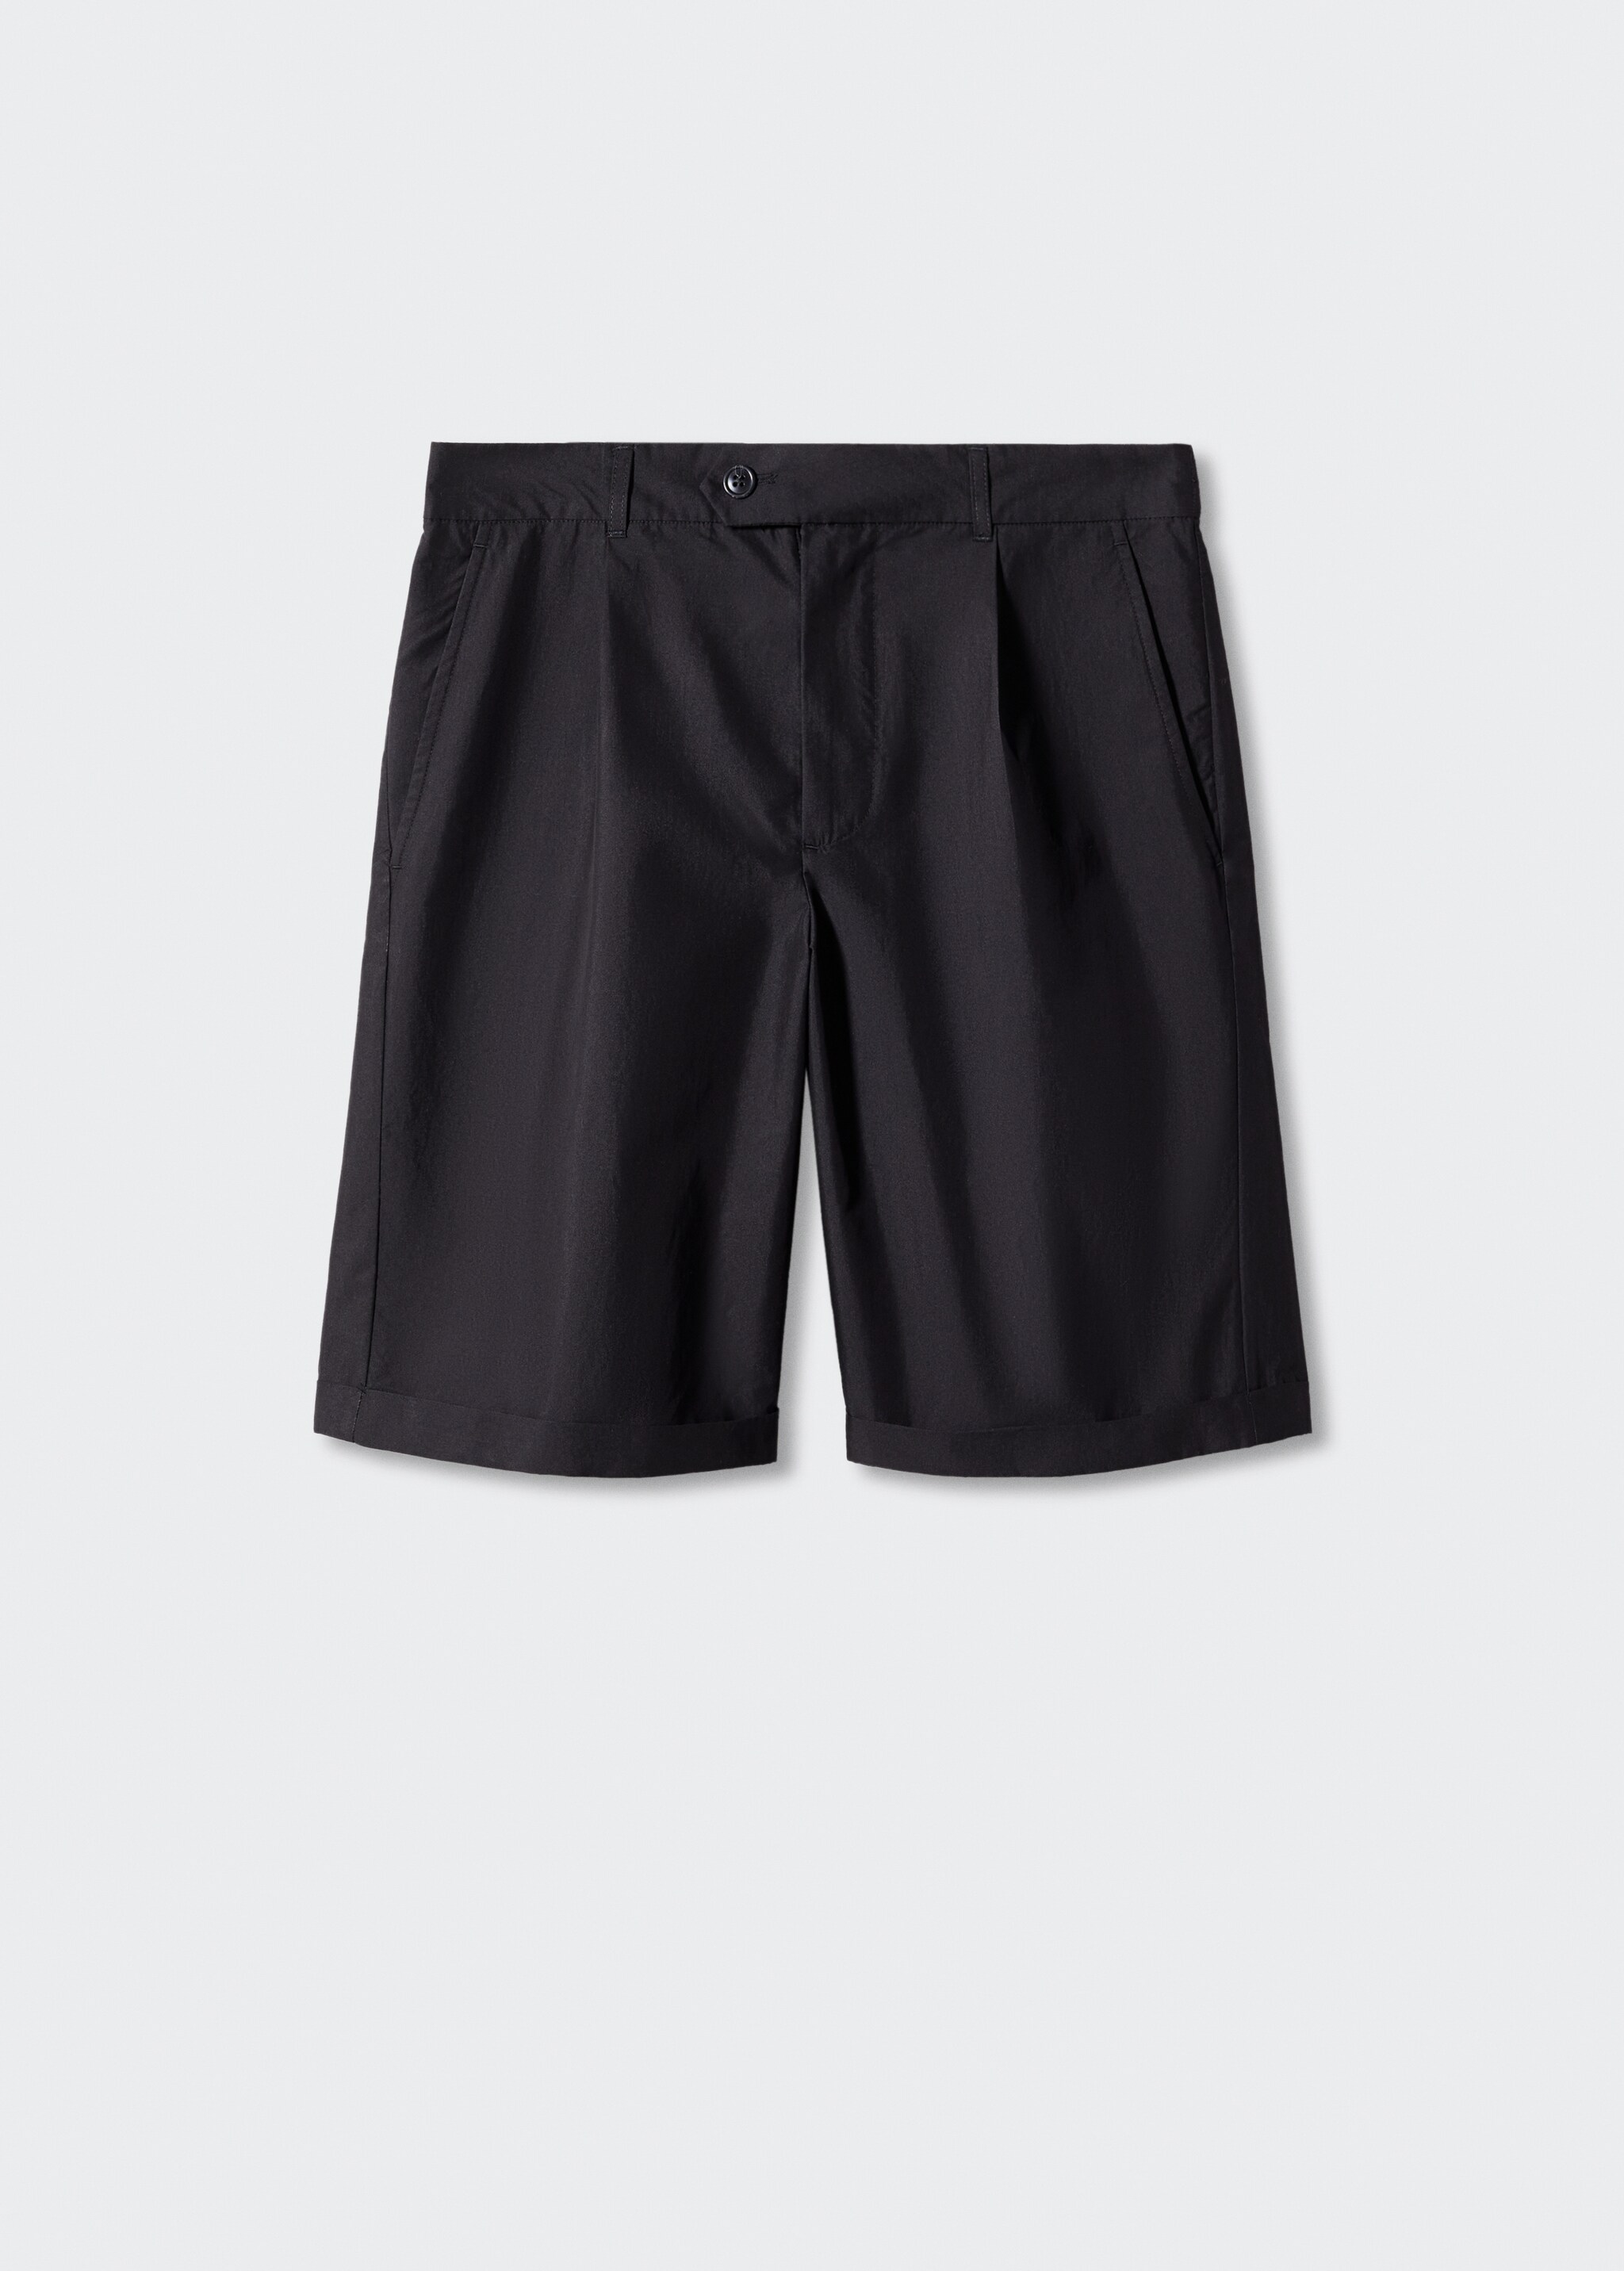 Cotton pleated Bermuda shorts - Article without model